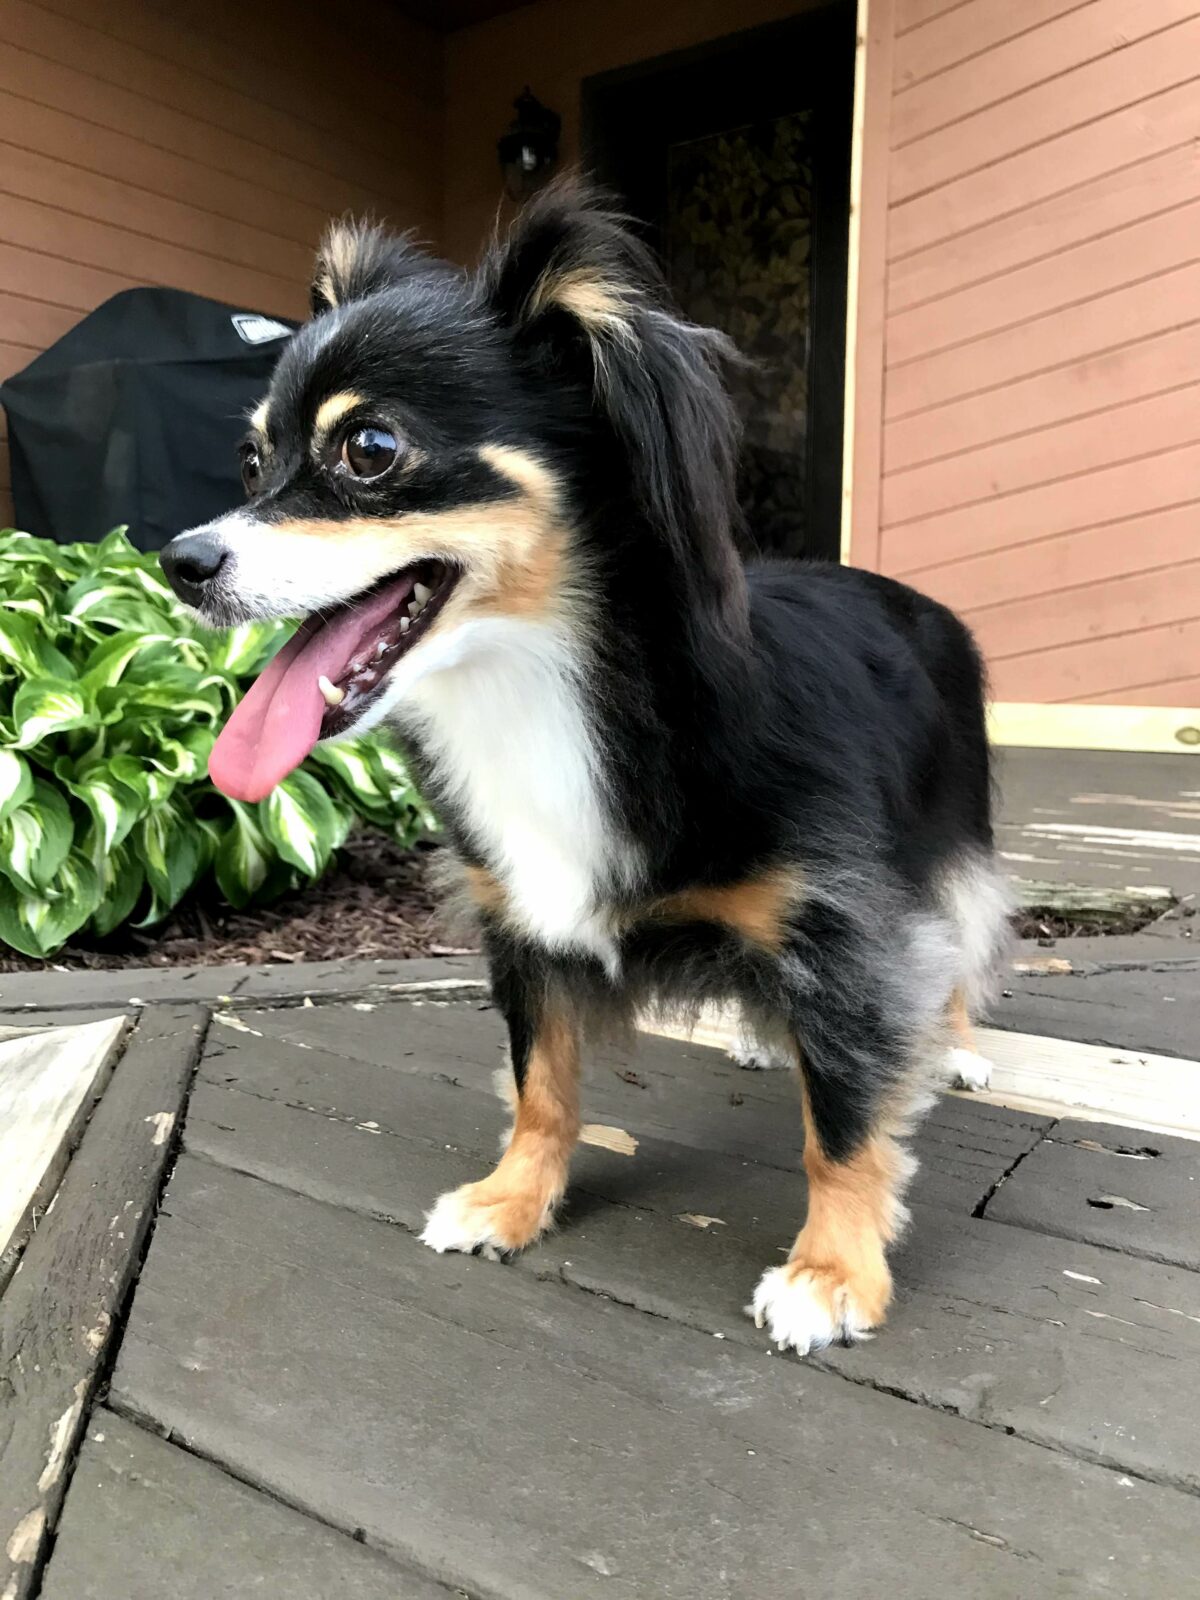 LOST: Ella, a Black Tricolor Long Haired Chihuahua – Findpet